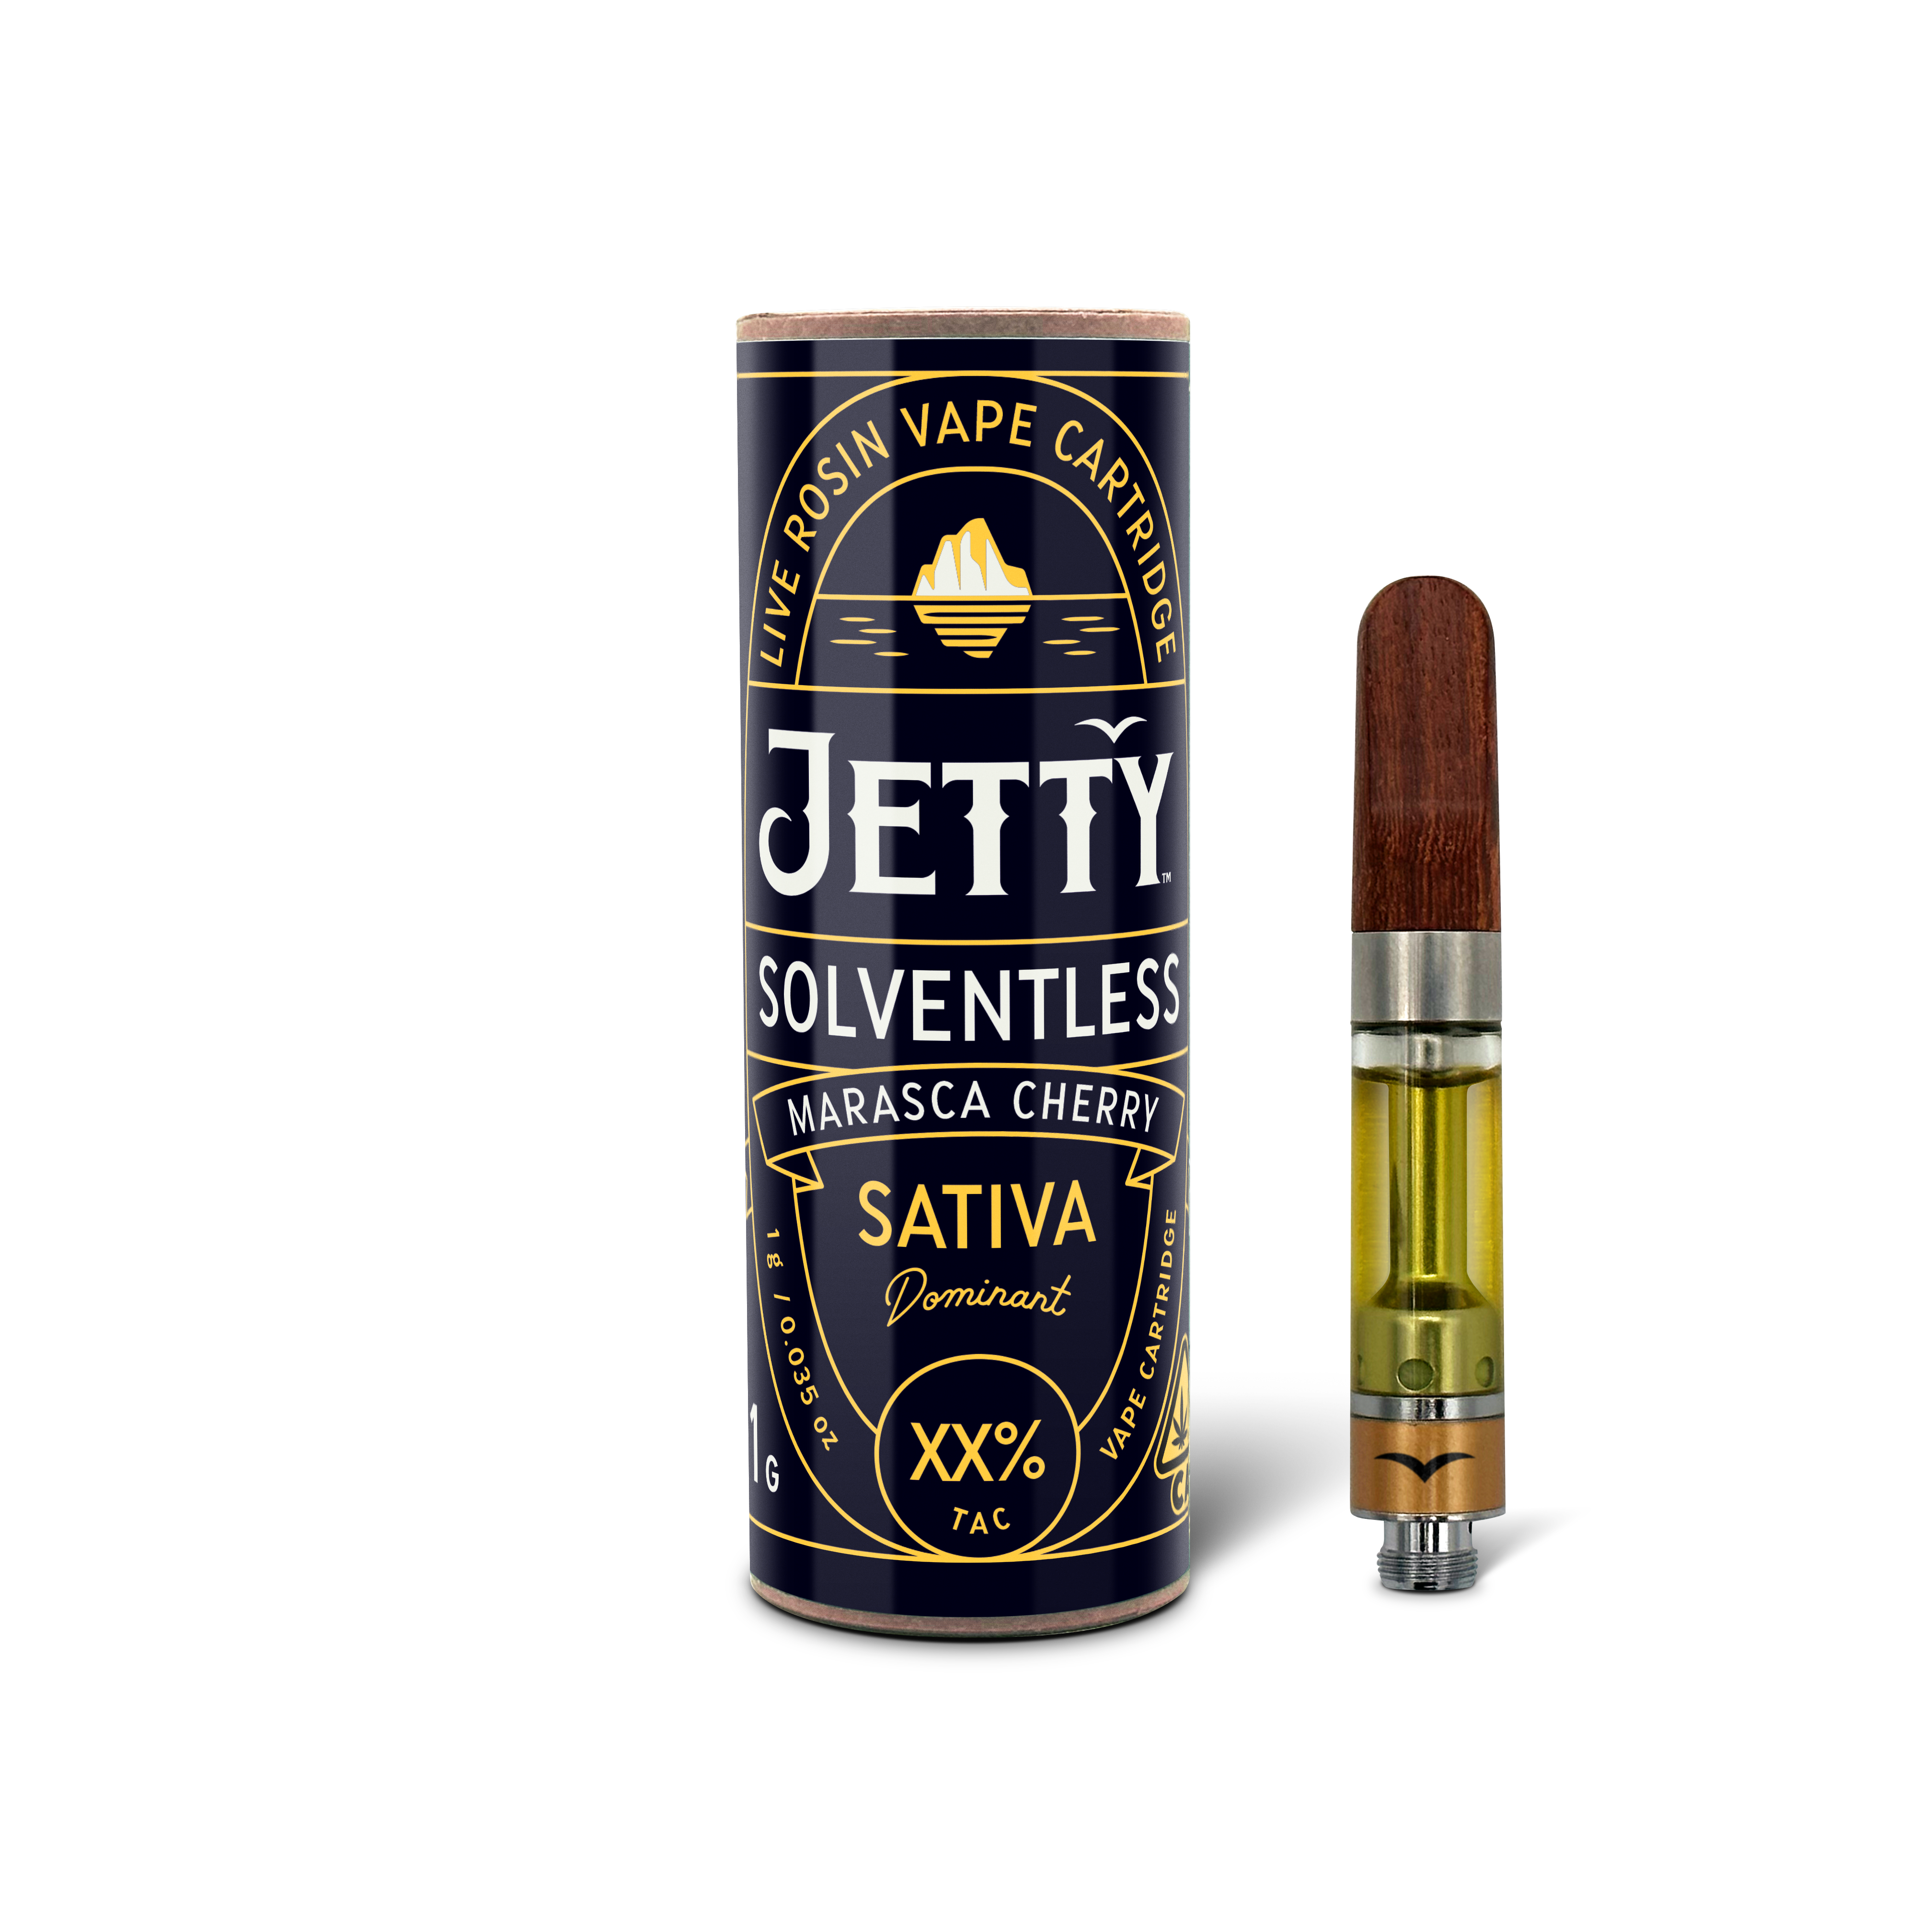 A photograph of Jetty Cartridge 1g Solventless Marasca Cherry